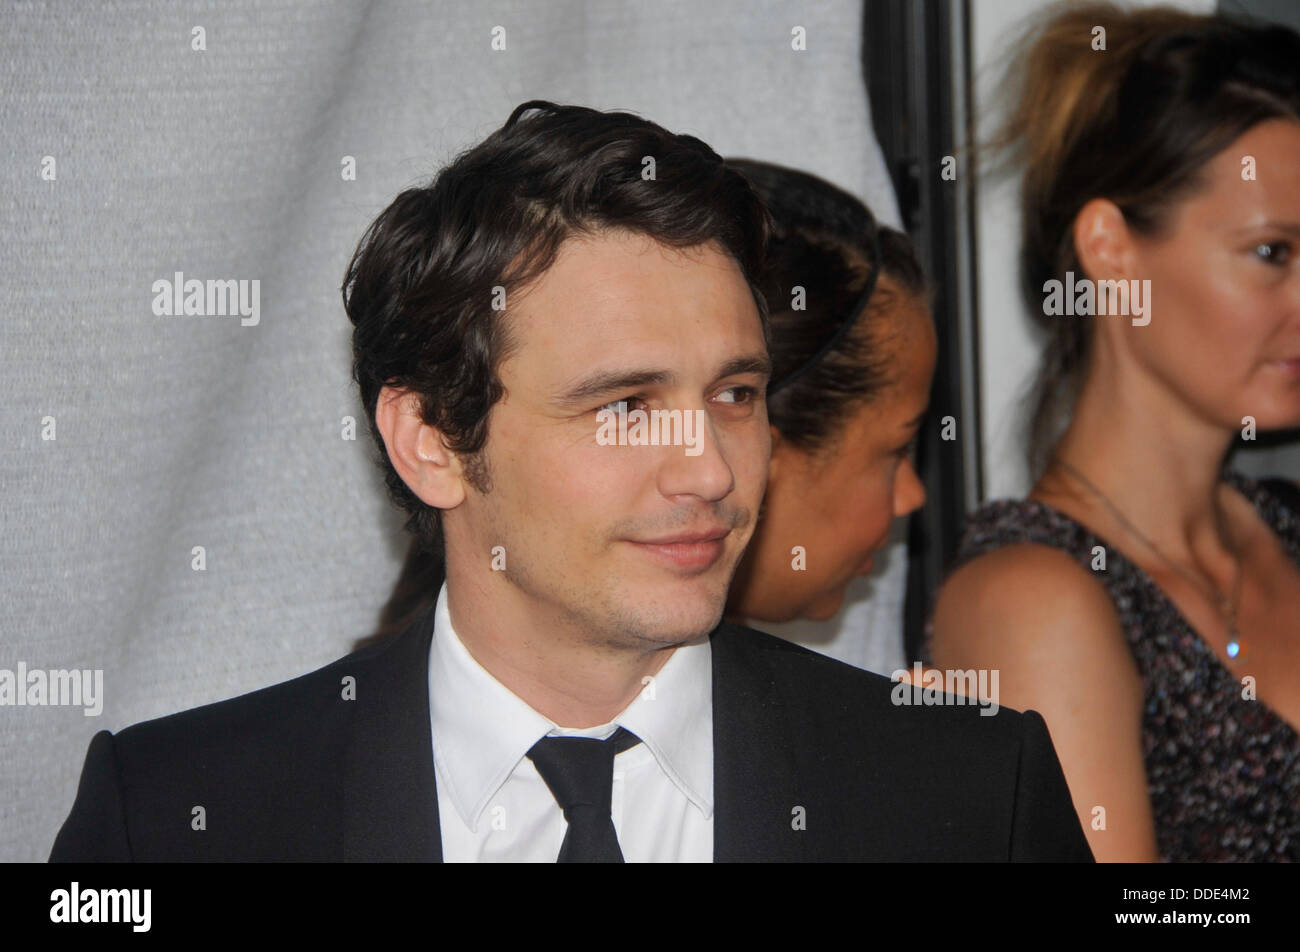 Actor James Franco attends 'Palo Alto' Photocall during the 70th Venice International Film Festival at Palazzo del Casino on September 1, 2013 in Venice, Italy. Stock Photo